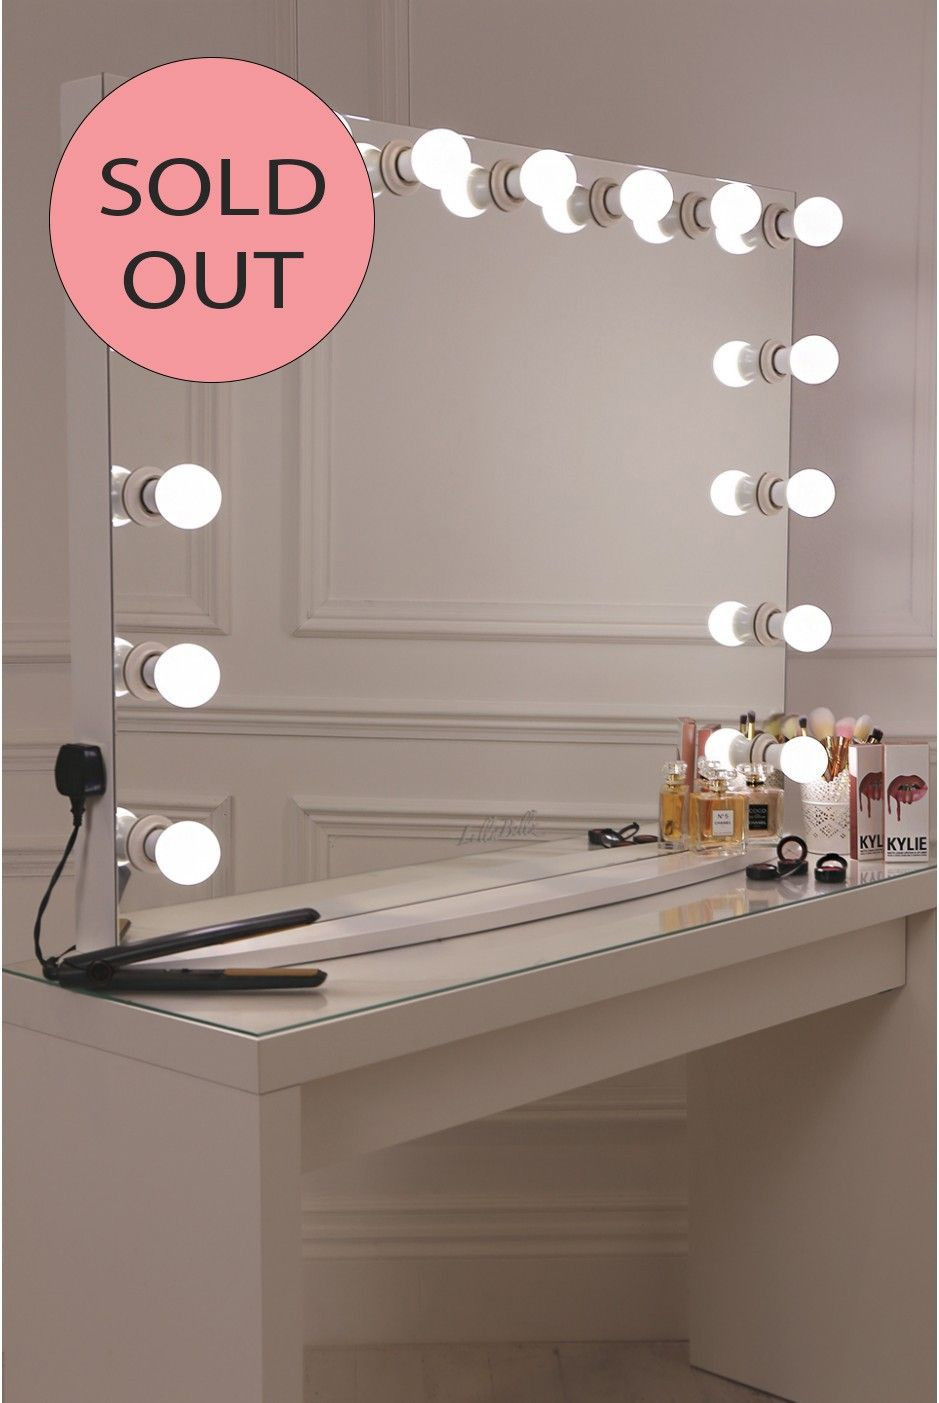 DIY Hollywood Lighted Vanity Mirror
 15 frosted bulb Hollywood Mirror with crisp white finish